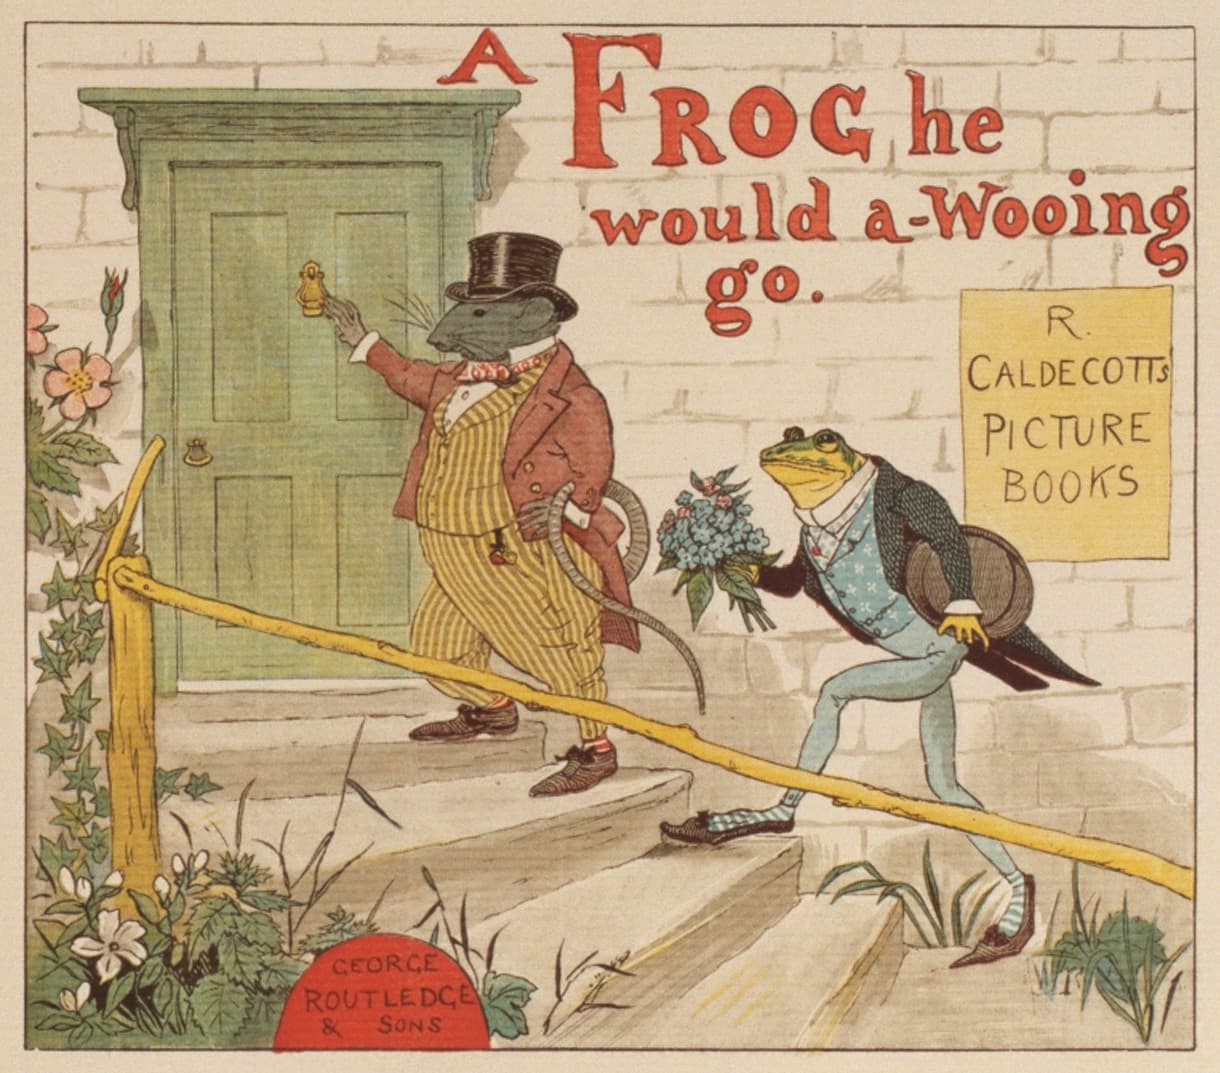 Front cover of A Frog He Would A-Wooing Go (page 343 of The Complete Collection of PICTURES and SONGS)